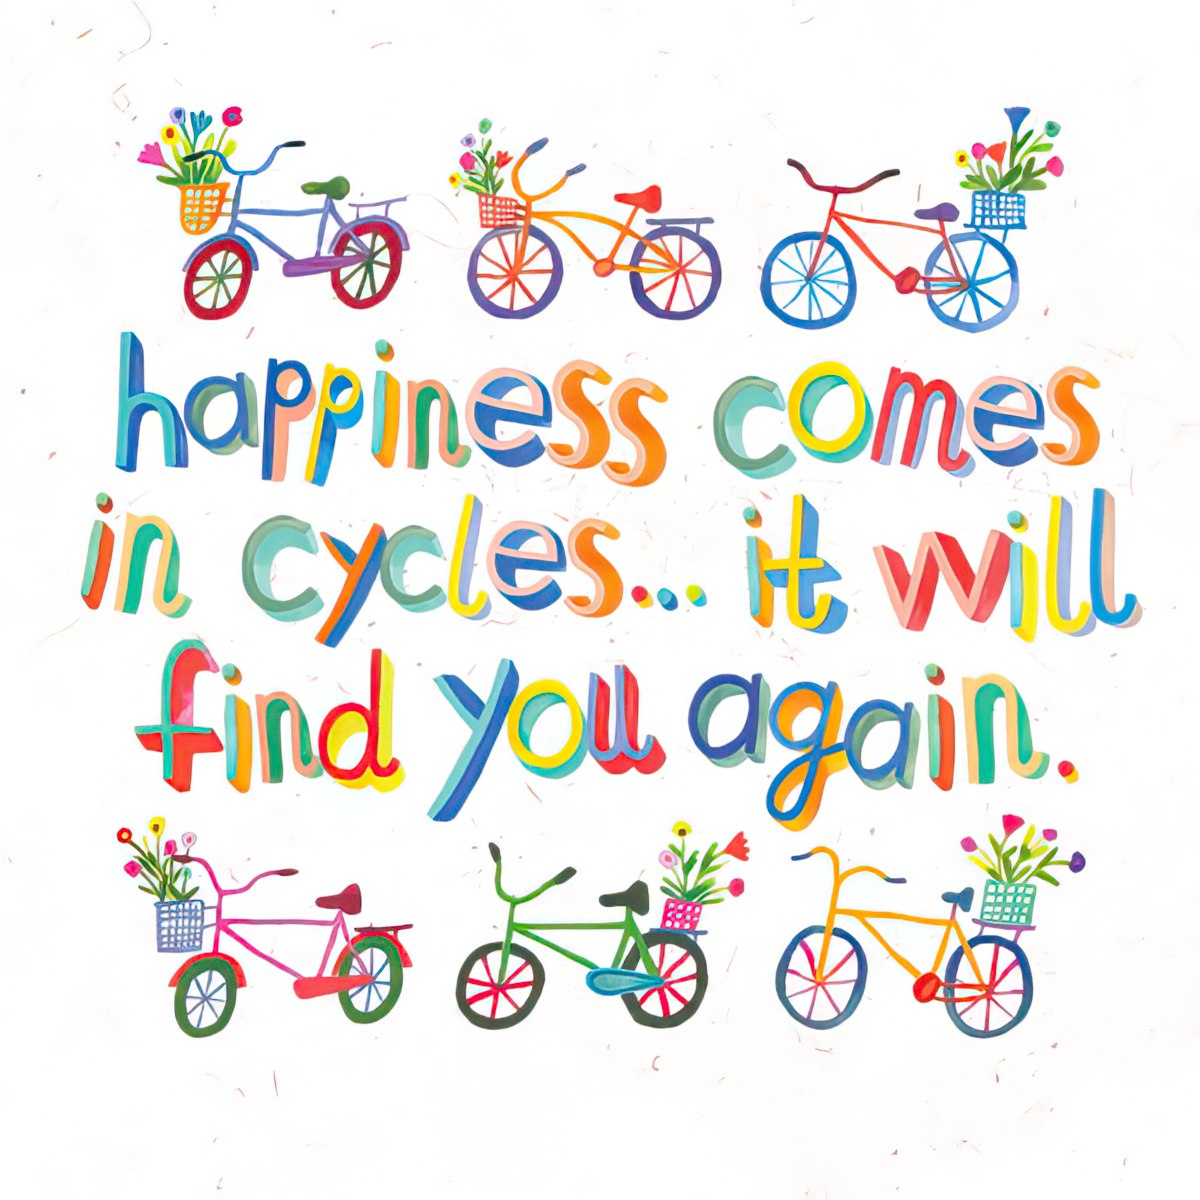 happiness comes in cycles